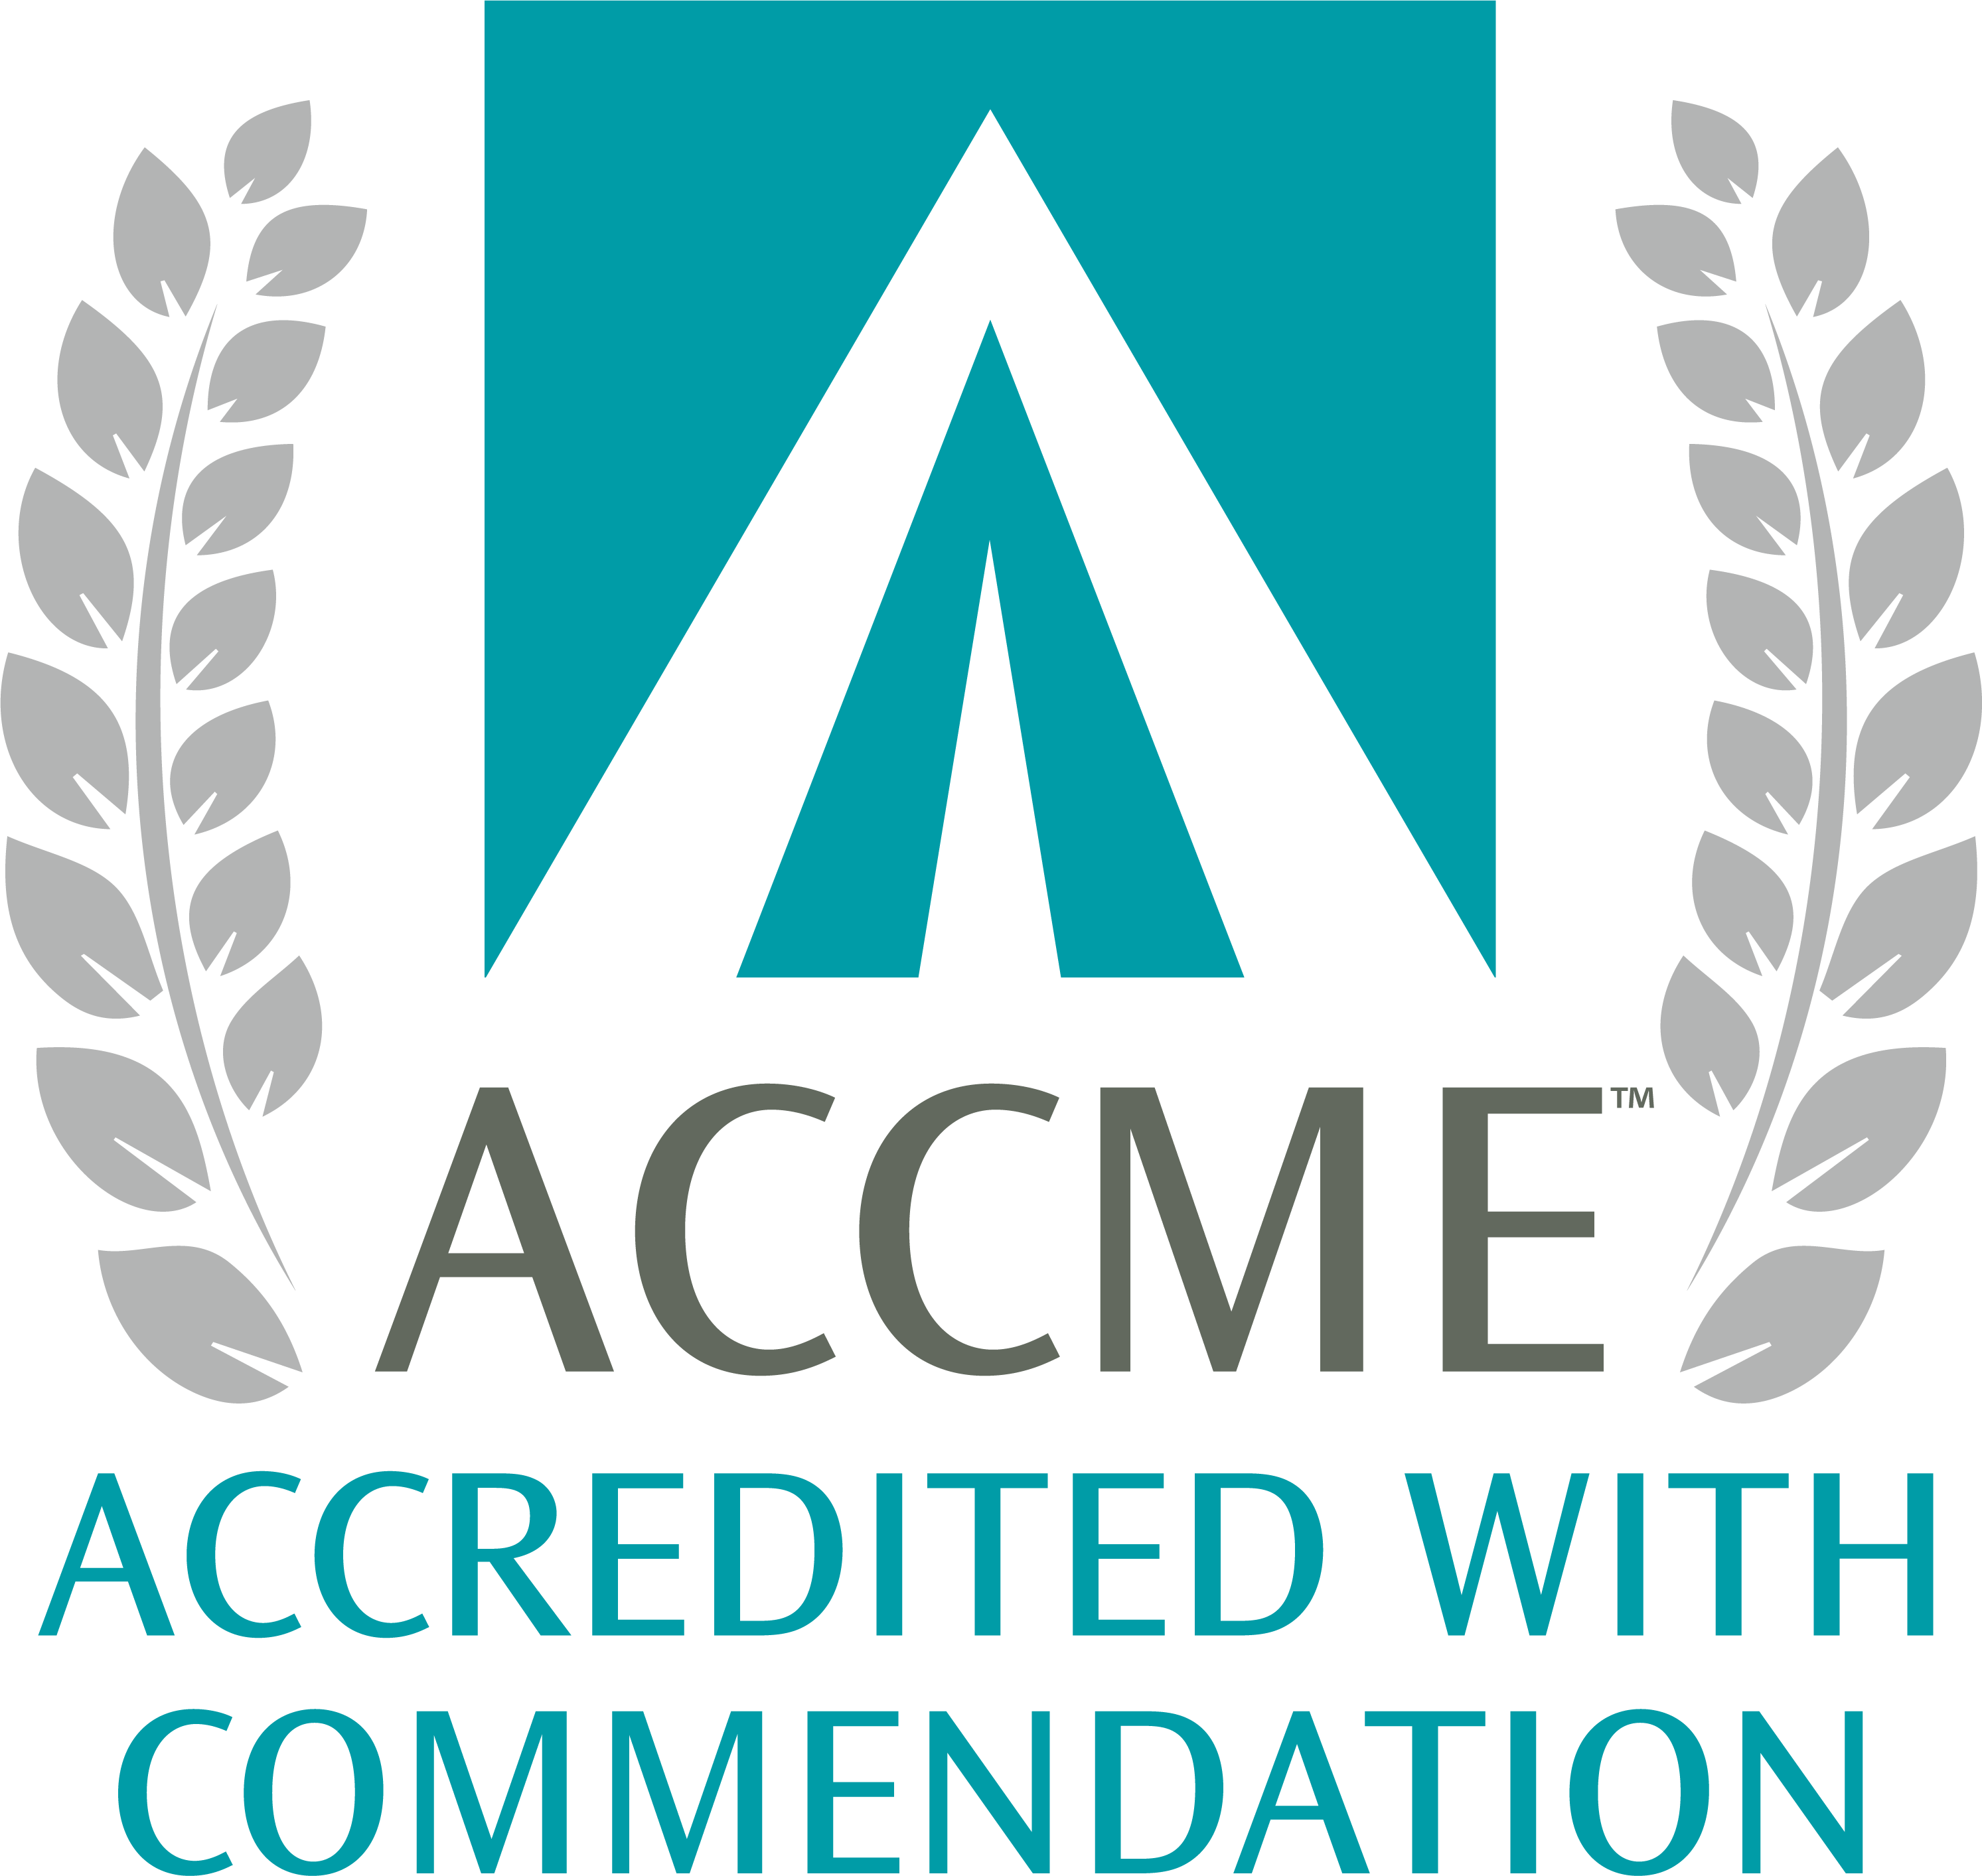 Accredited with Commendation